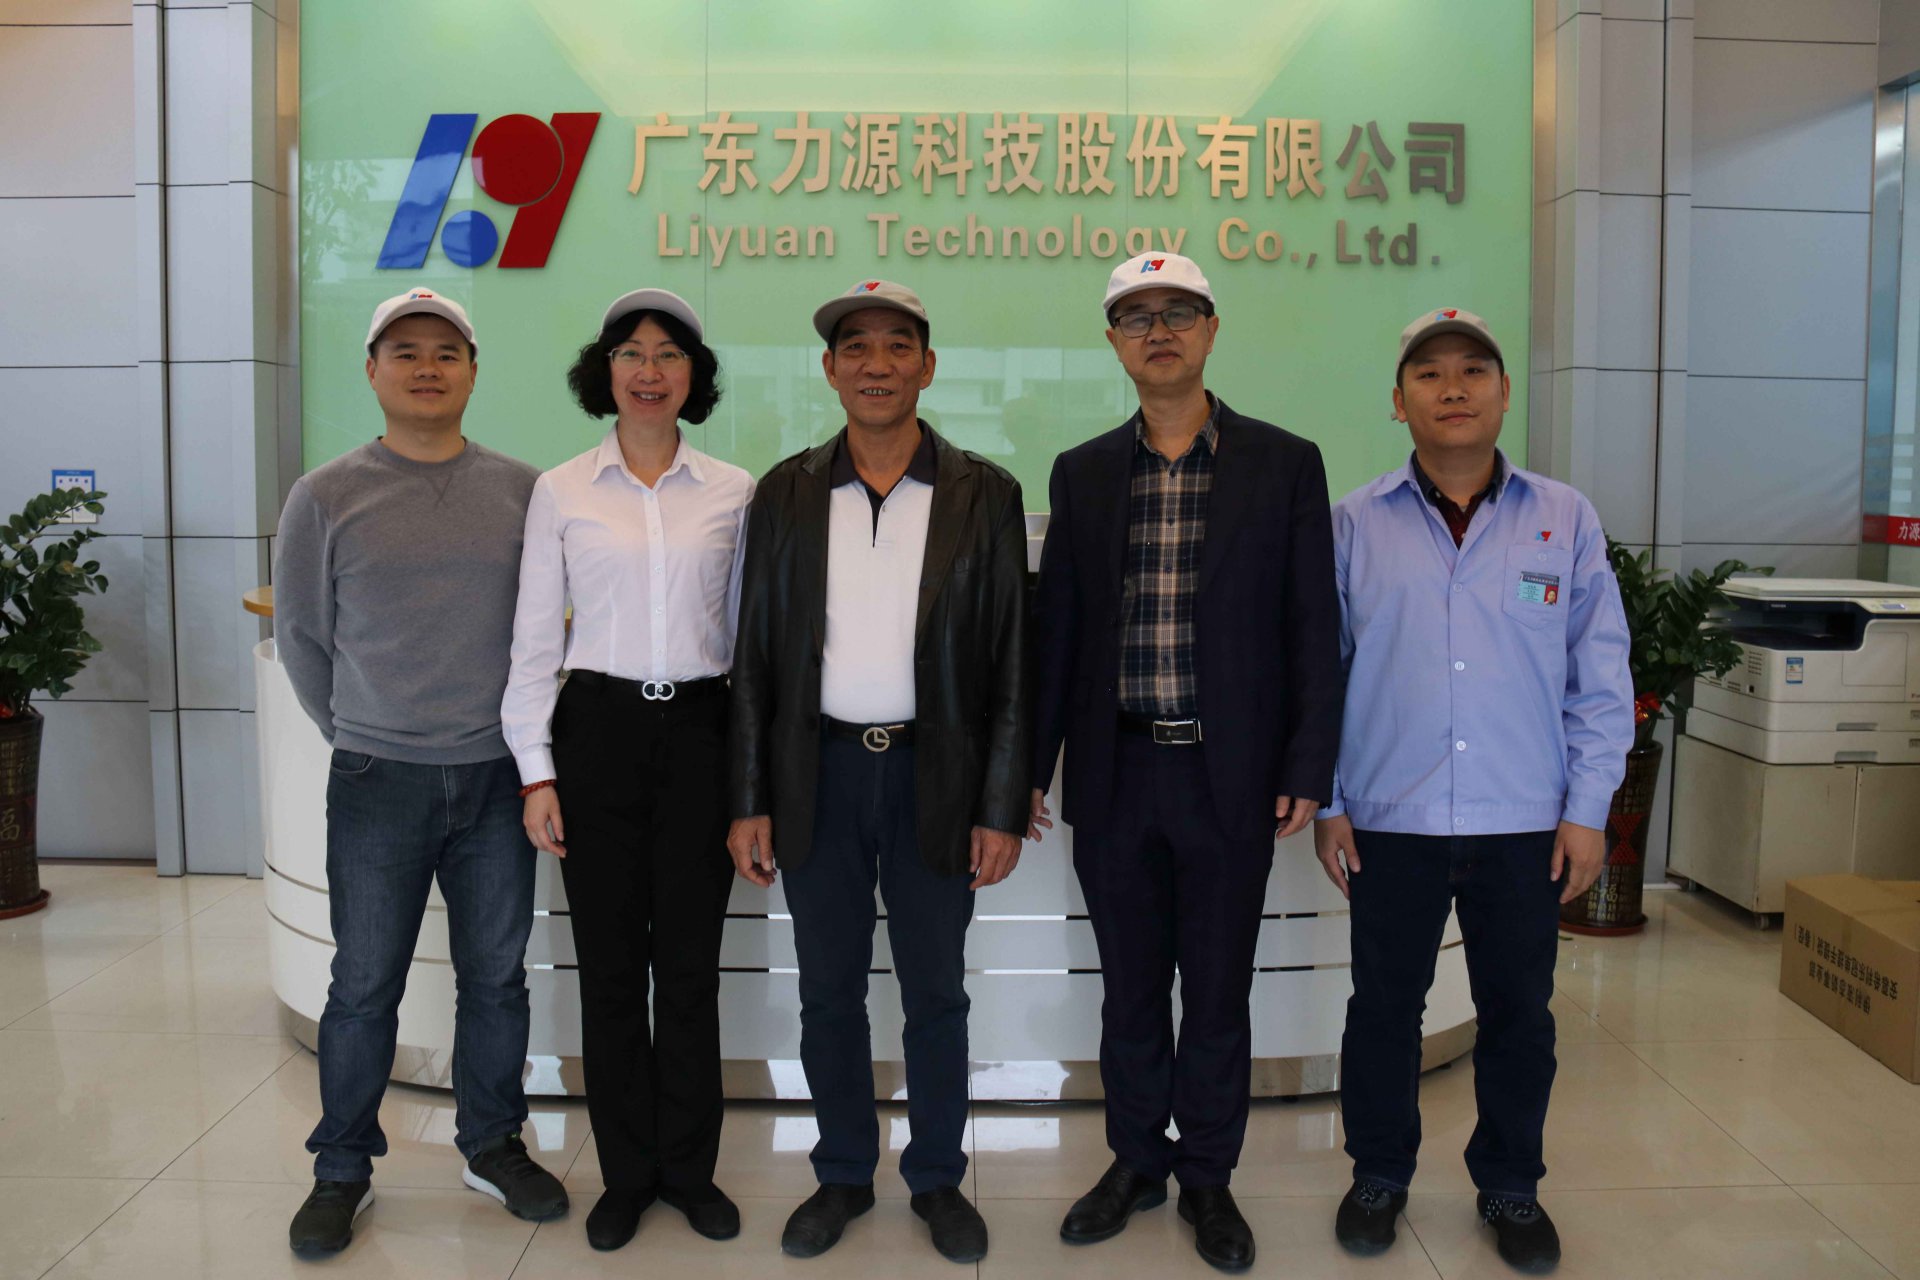 The Die Casting Assosiation visited Our Company